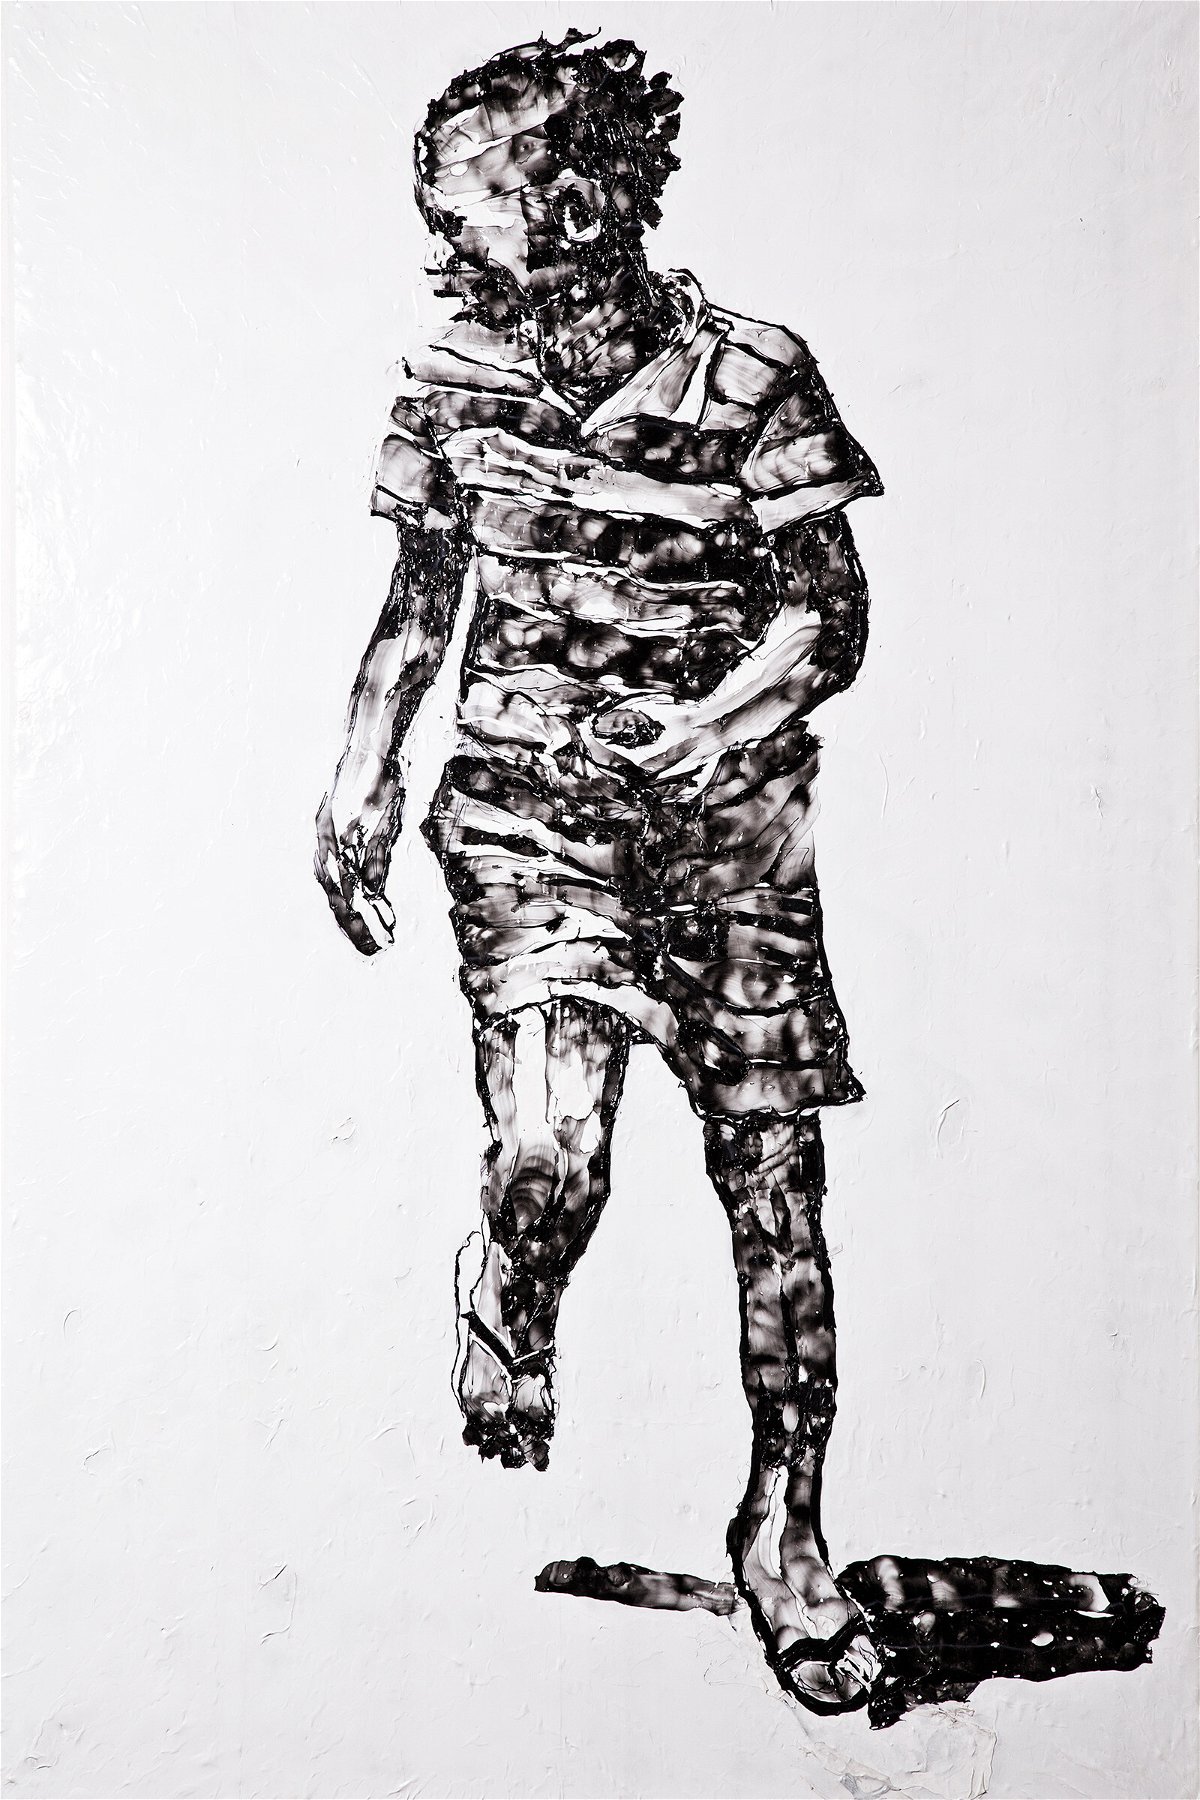 <i>Mbongeni Buthelezi</i><br/>While other artists might use watercolors or oil paints